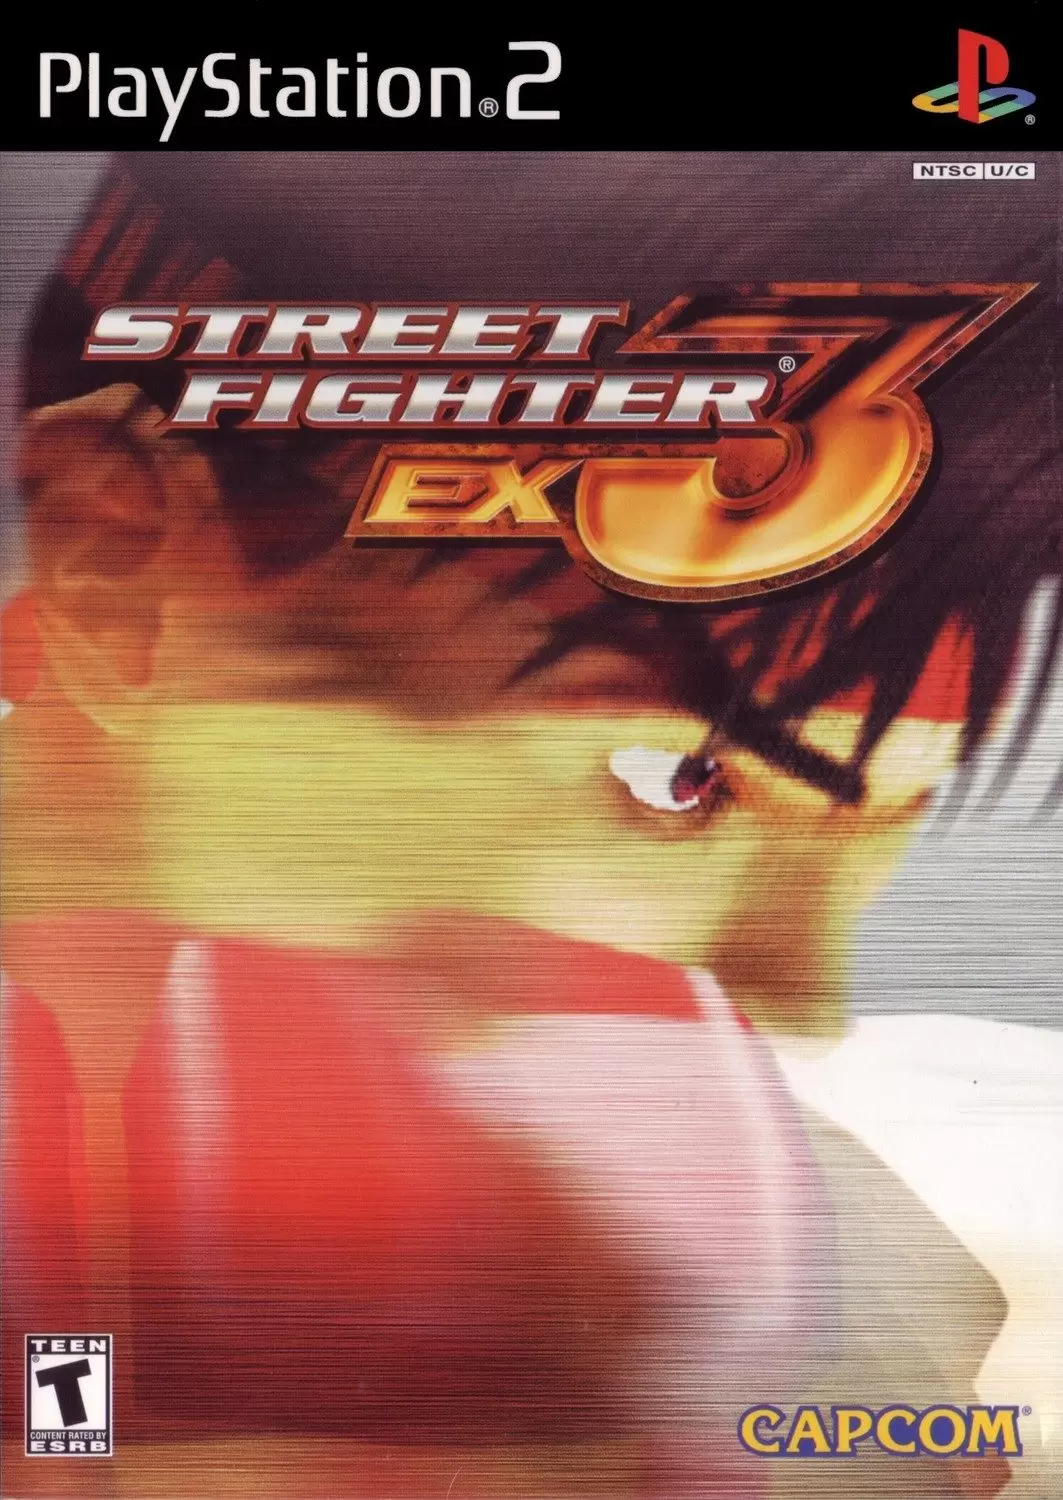 PS2 Games - Street Fighter EX3